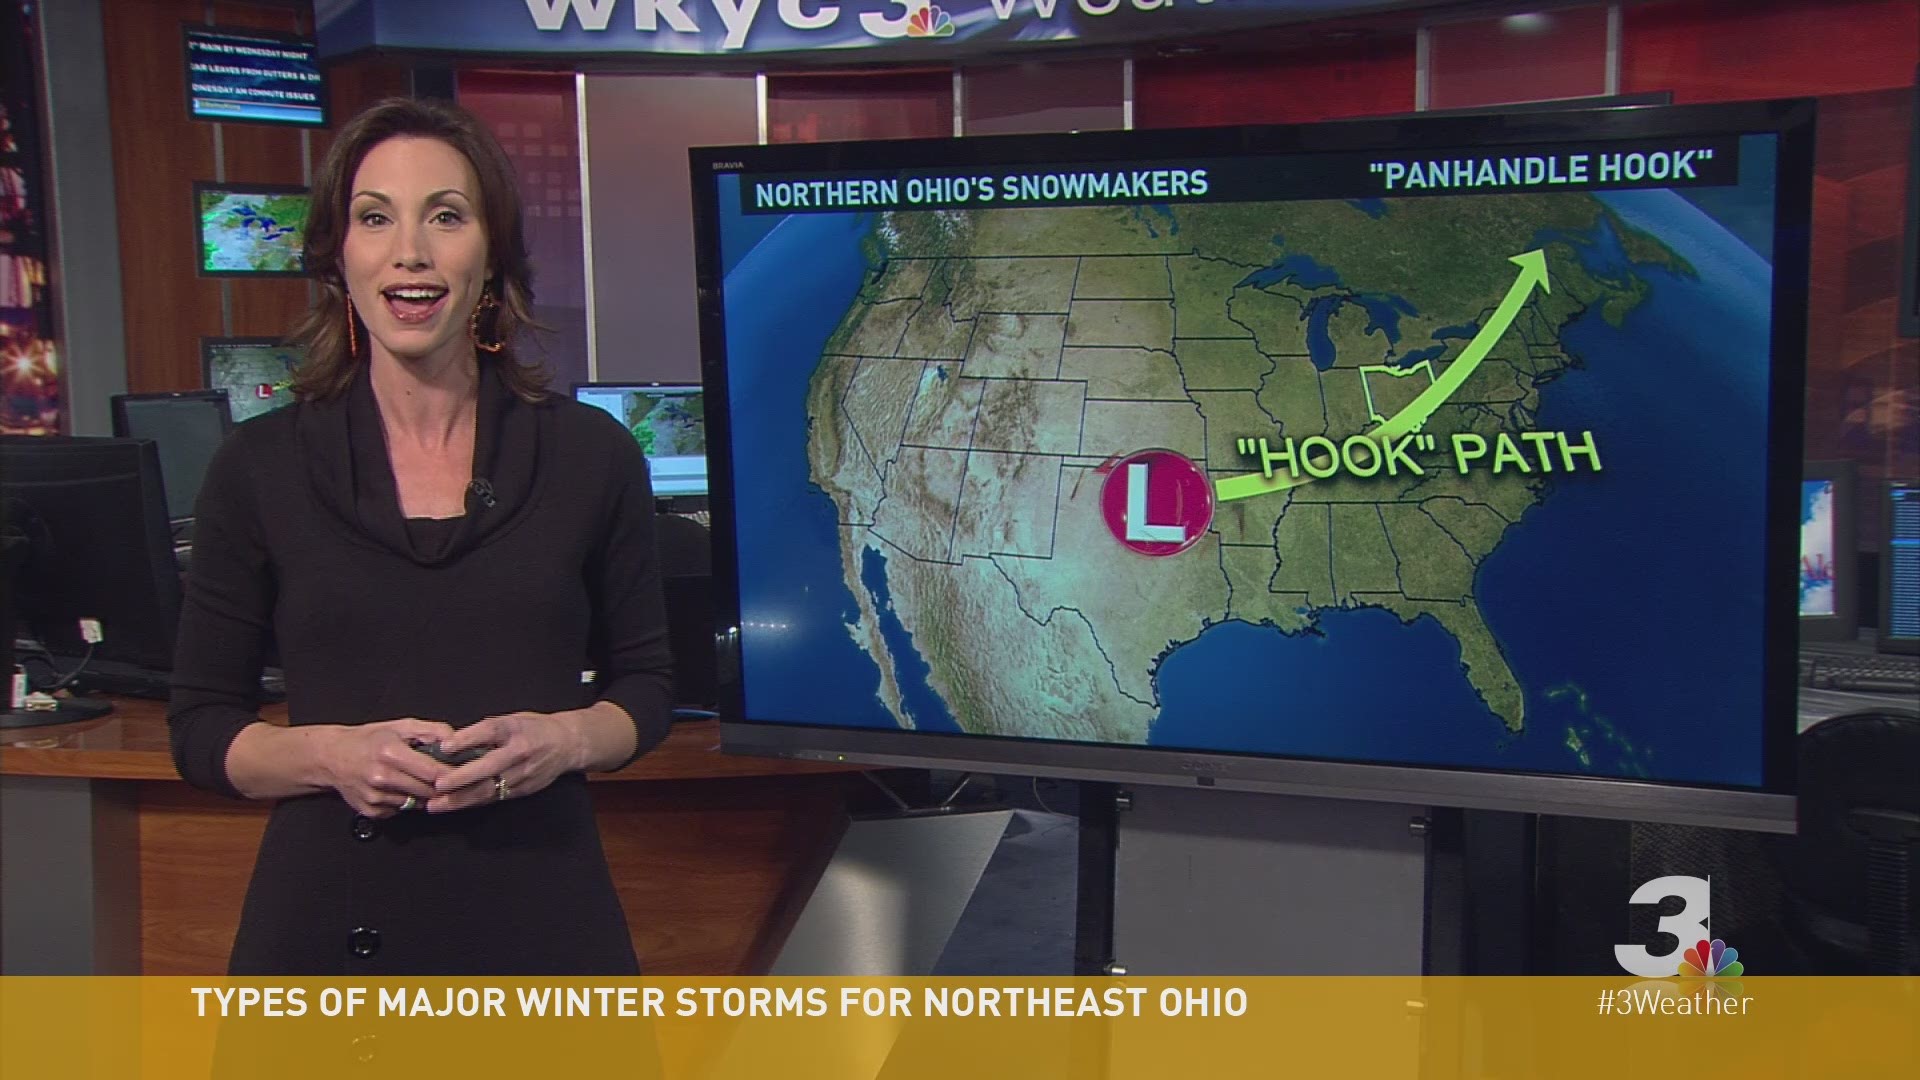 WKYC Chief Meteorologist Betsy Kling discusses types of winter storms that affect northeast Ohio.